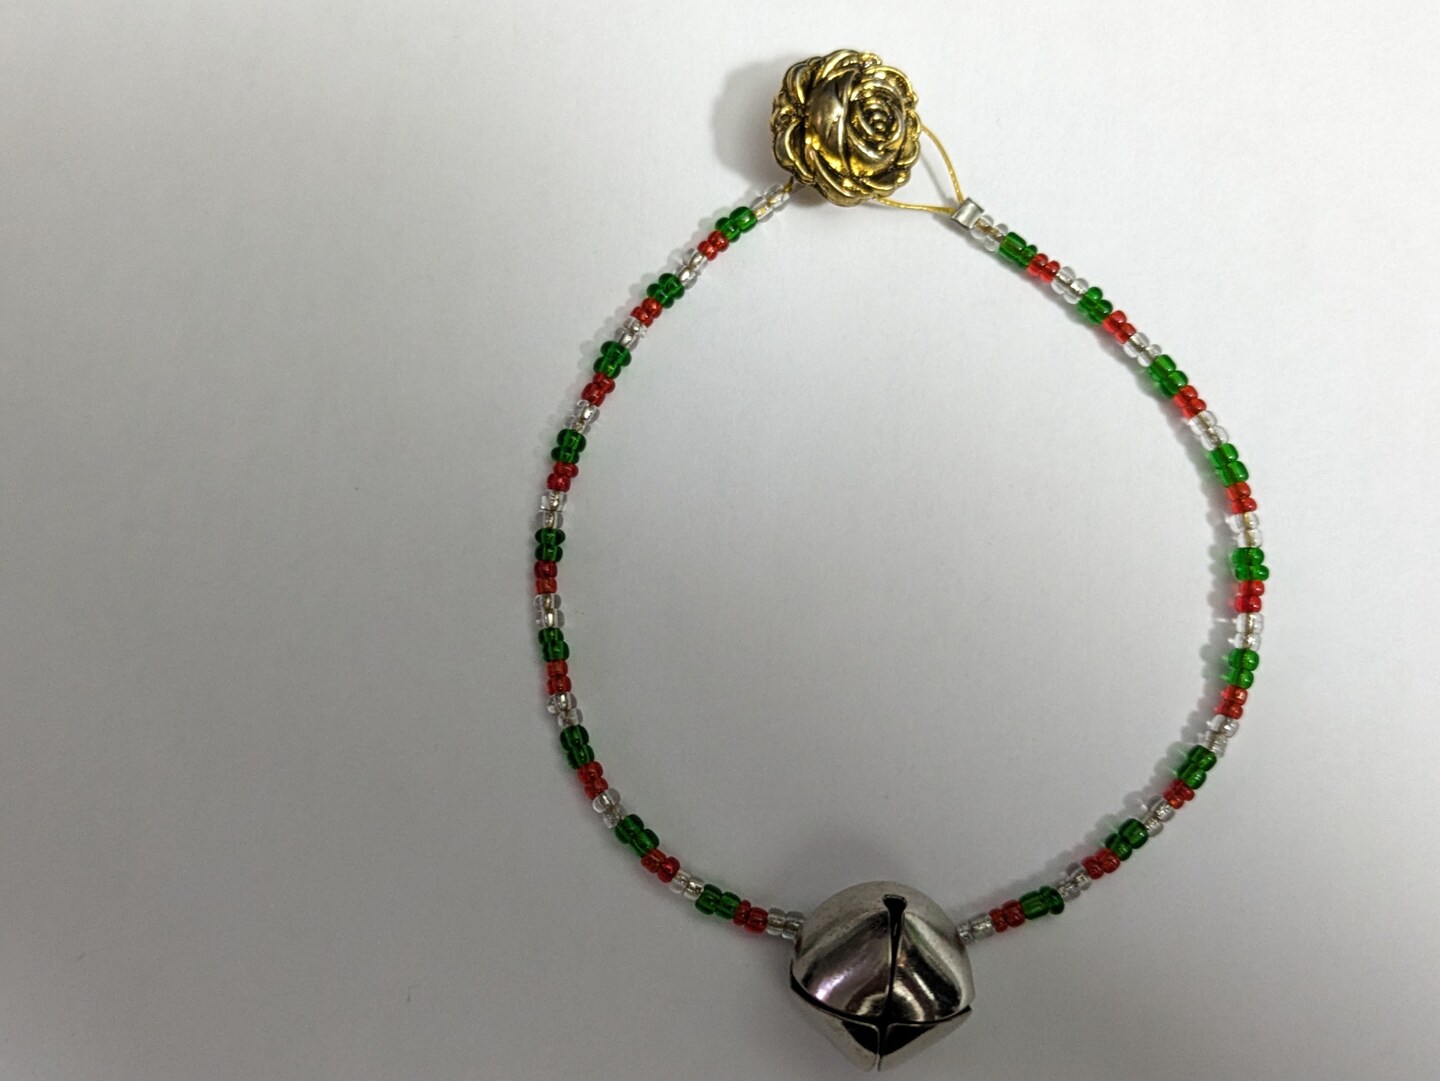 Jingle Bell Bracelet with red, green and silver seed beads. Gold